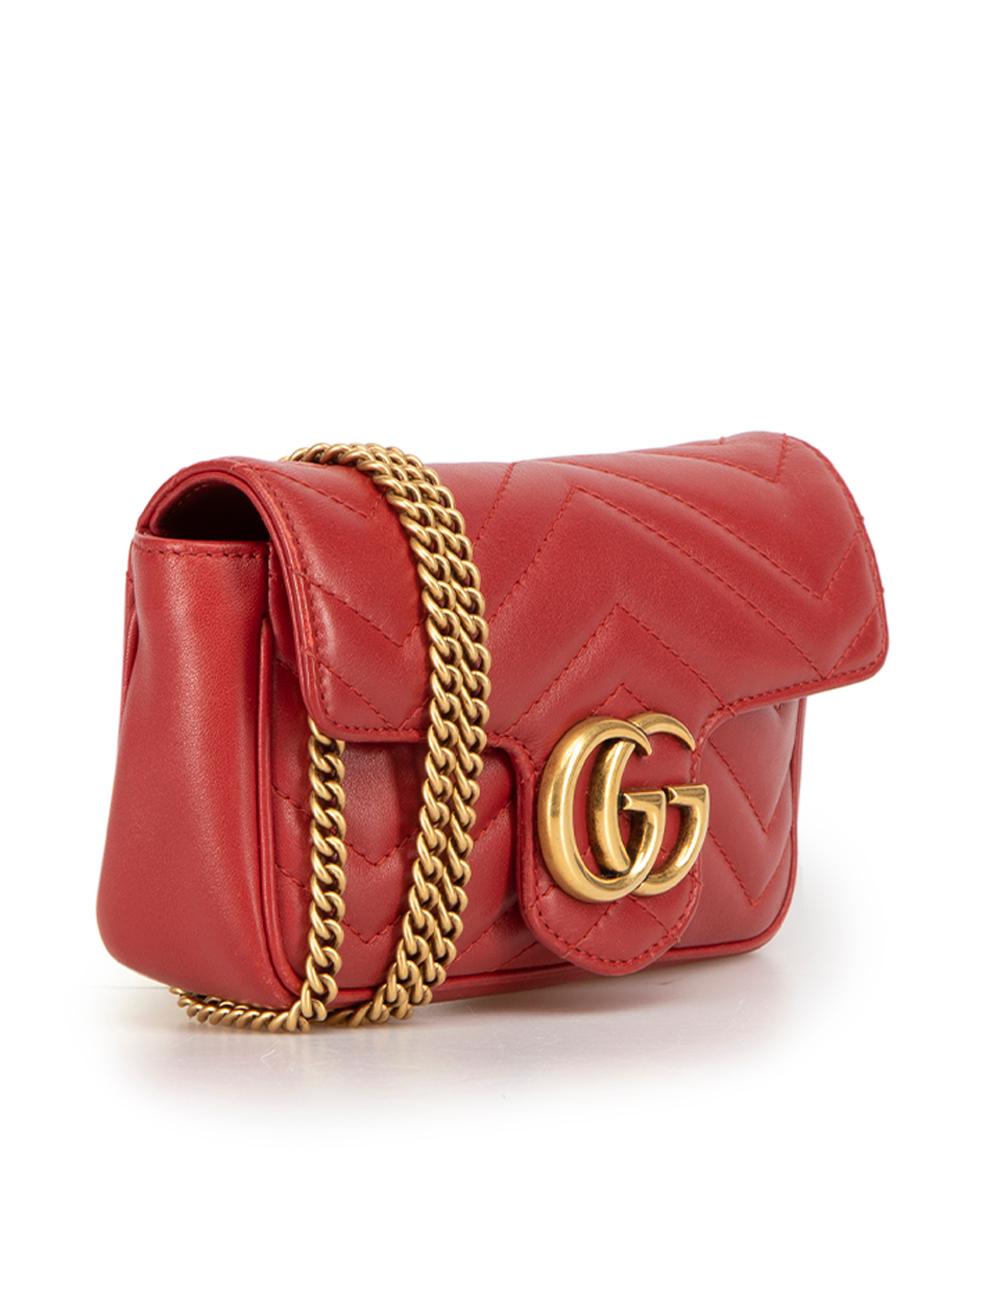 CONDITION is Very good. Minimal wear to bag is evident. Minor scratching along leather on side and base of this used Gucci designer resale item.



Details


Red

Leather

Mini crossbody bag

Gold tone hardware

GG Logo

Detachable chain